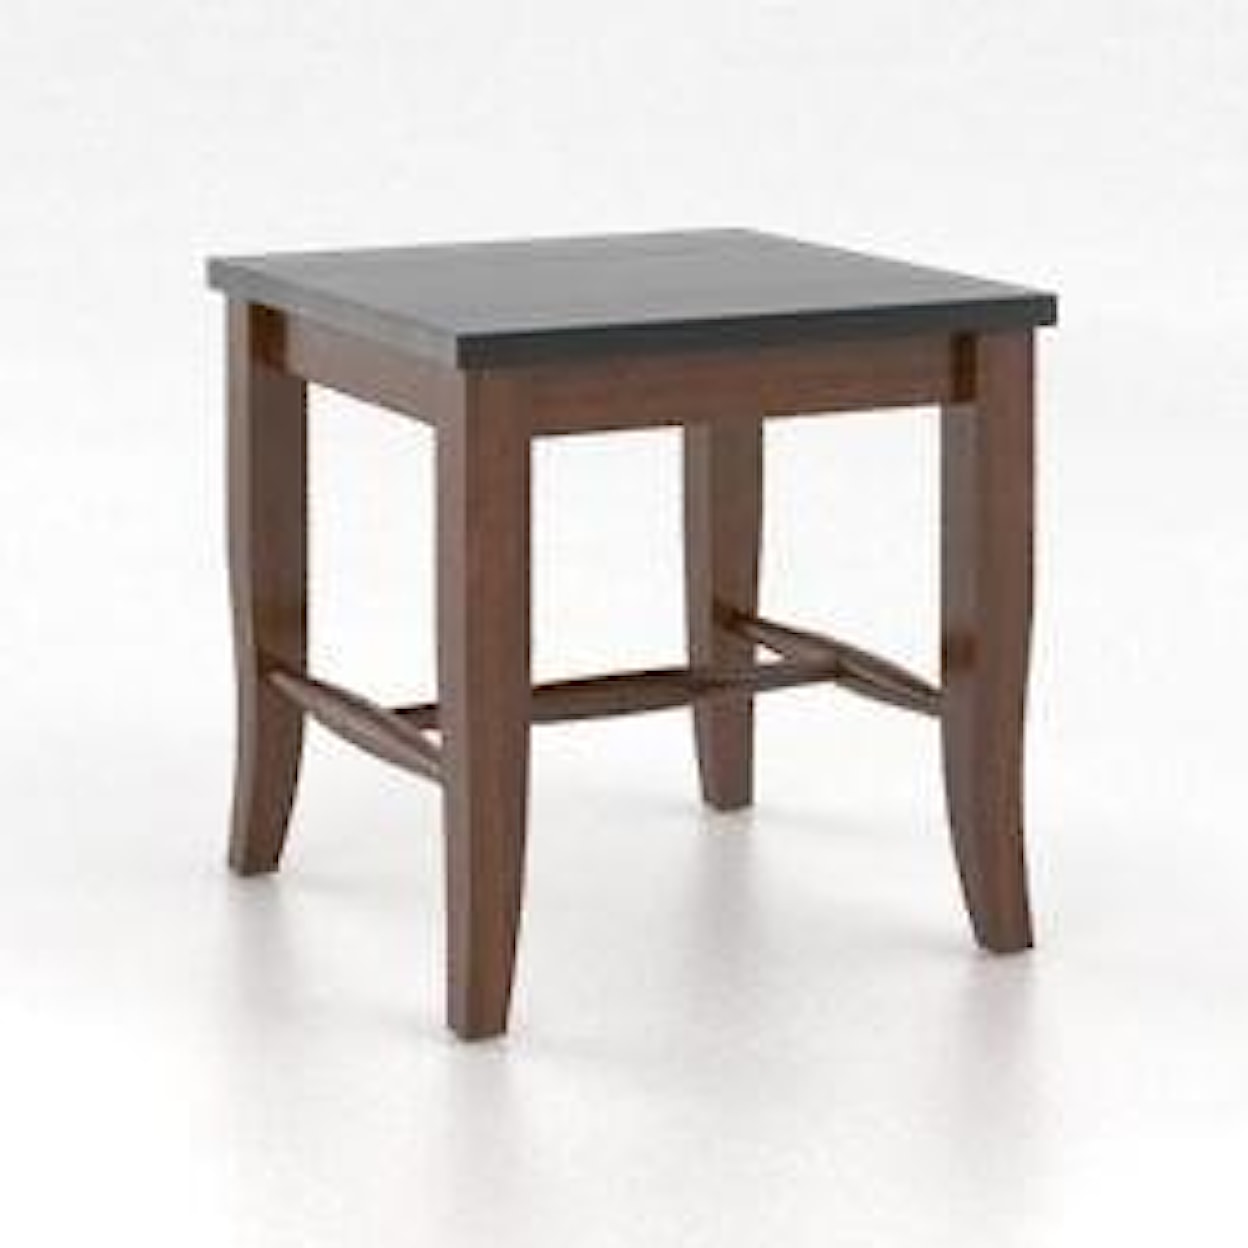 Canadel Canadel 18" Wooden Seat Bench